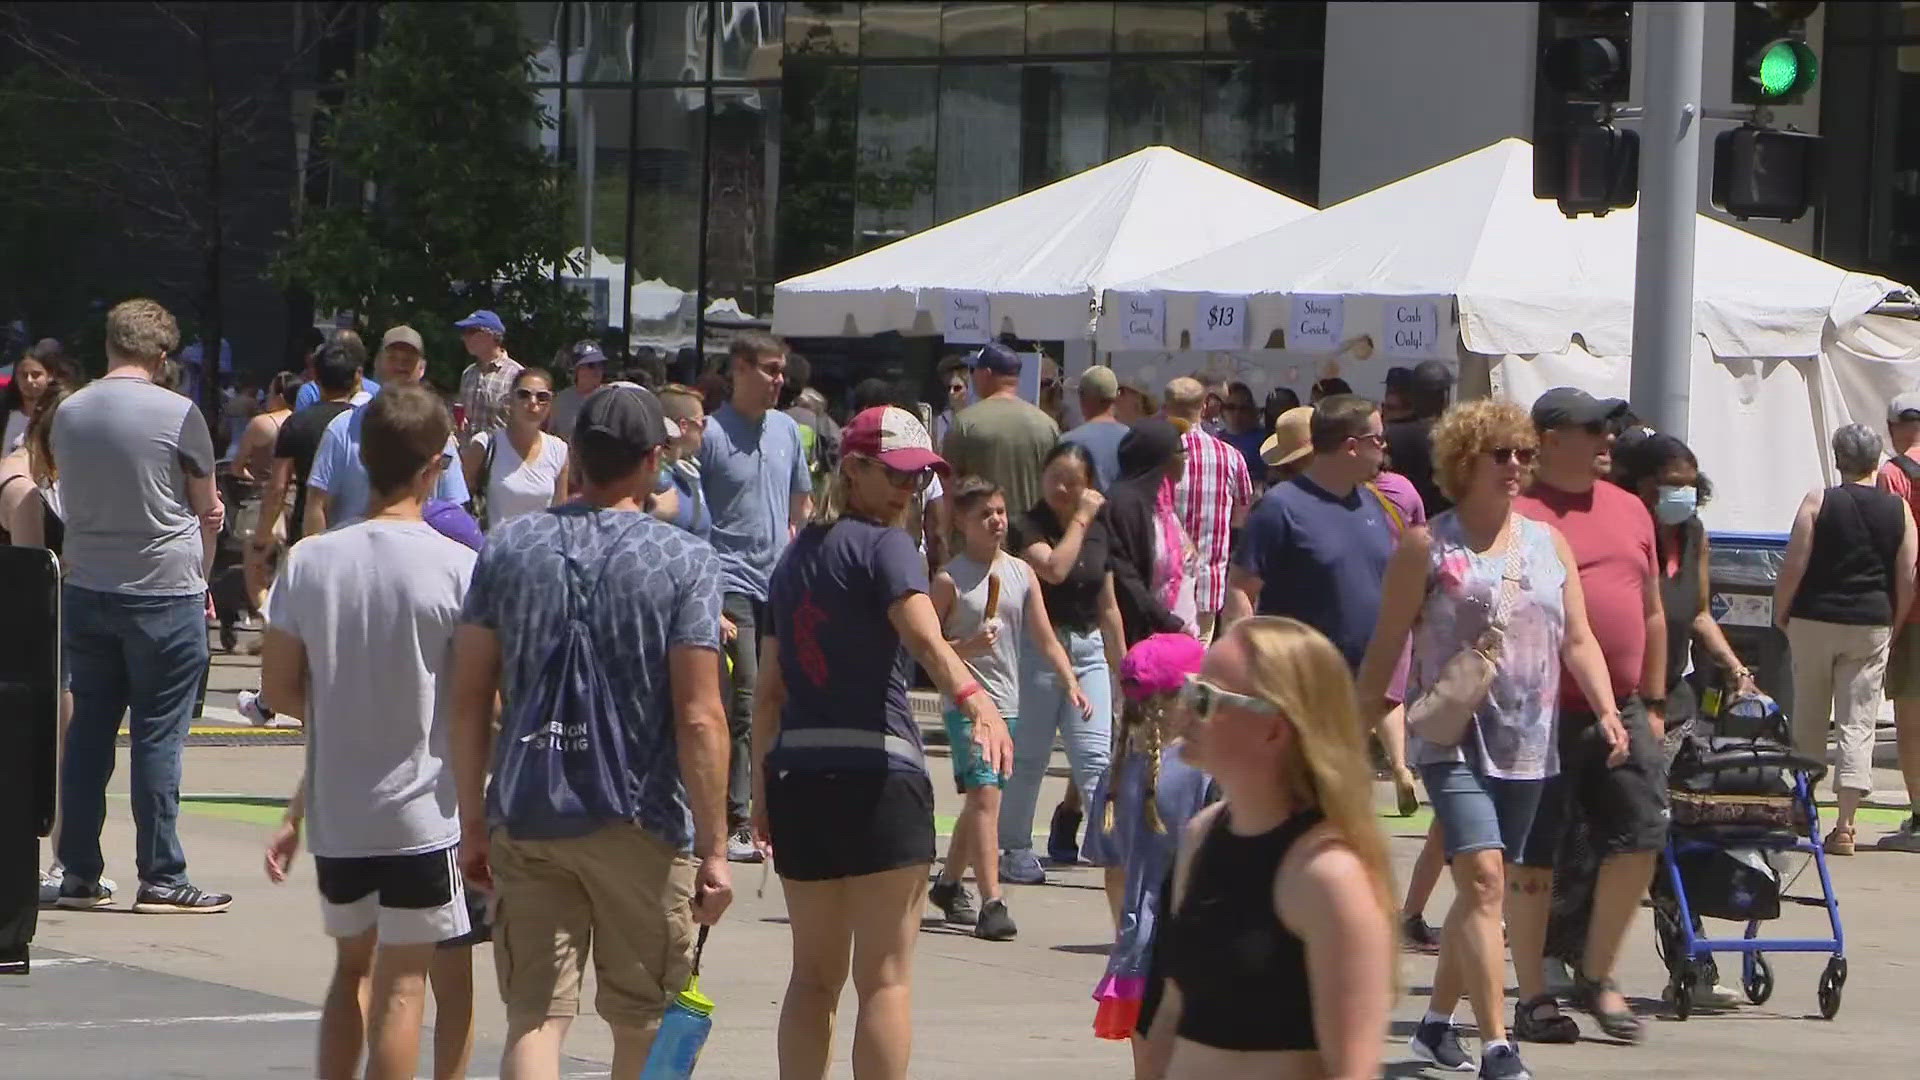 The two-day festival takes place over July 6 and 7 on Nicollet Mall and runs from 11 a.m. to 8 p.m. each day.